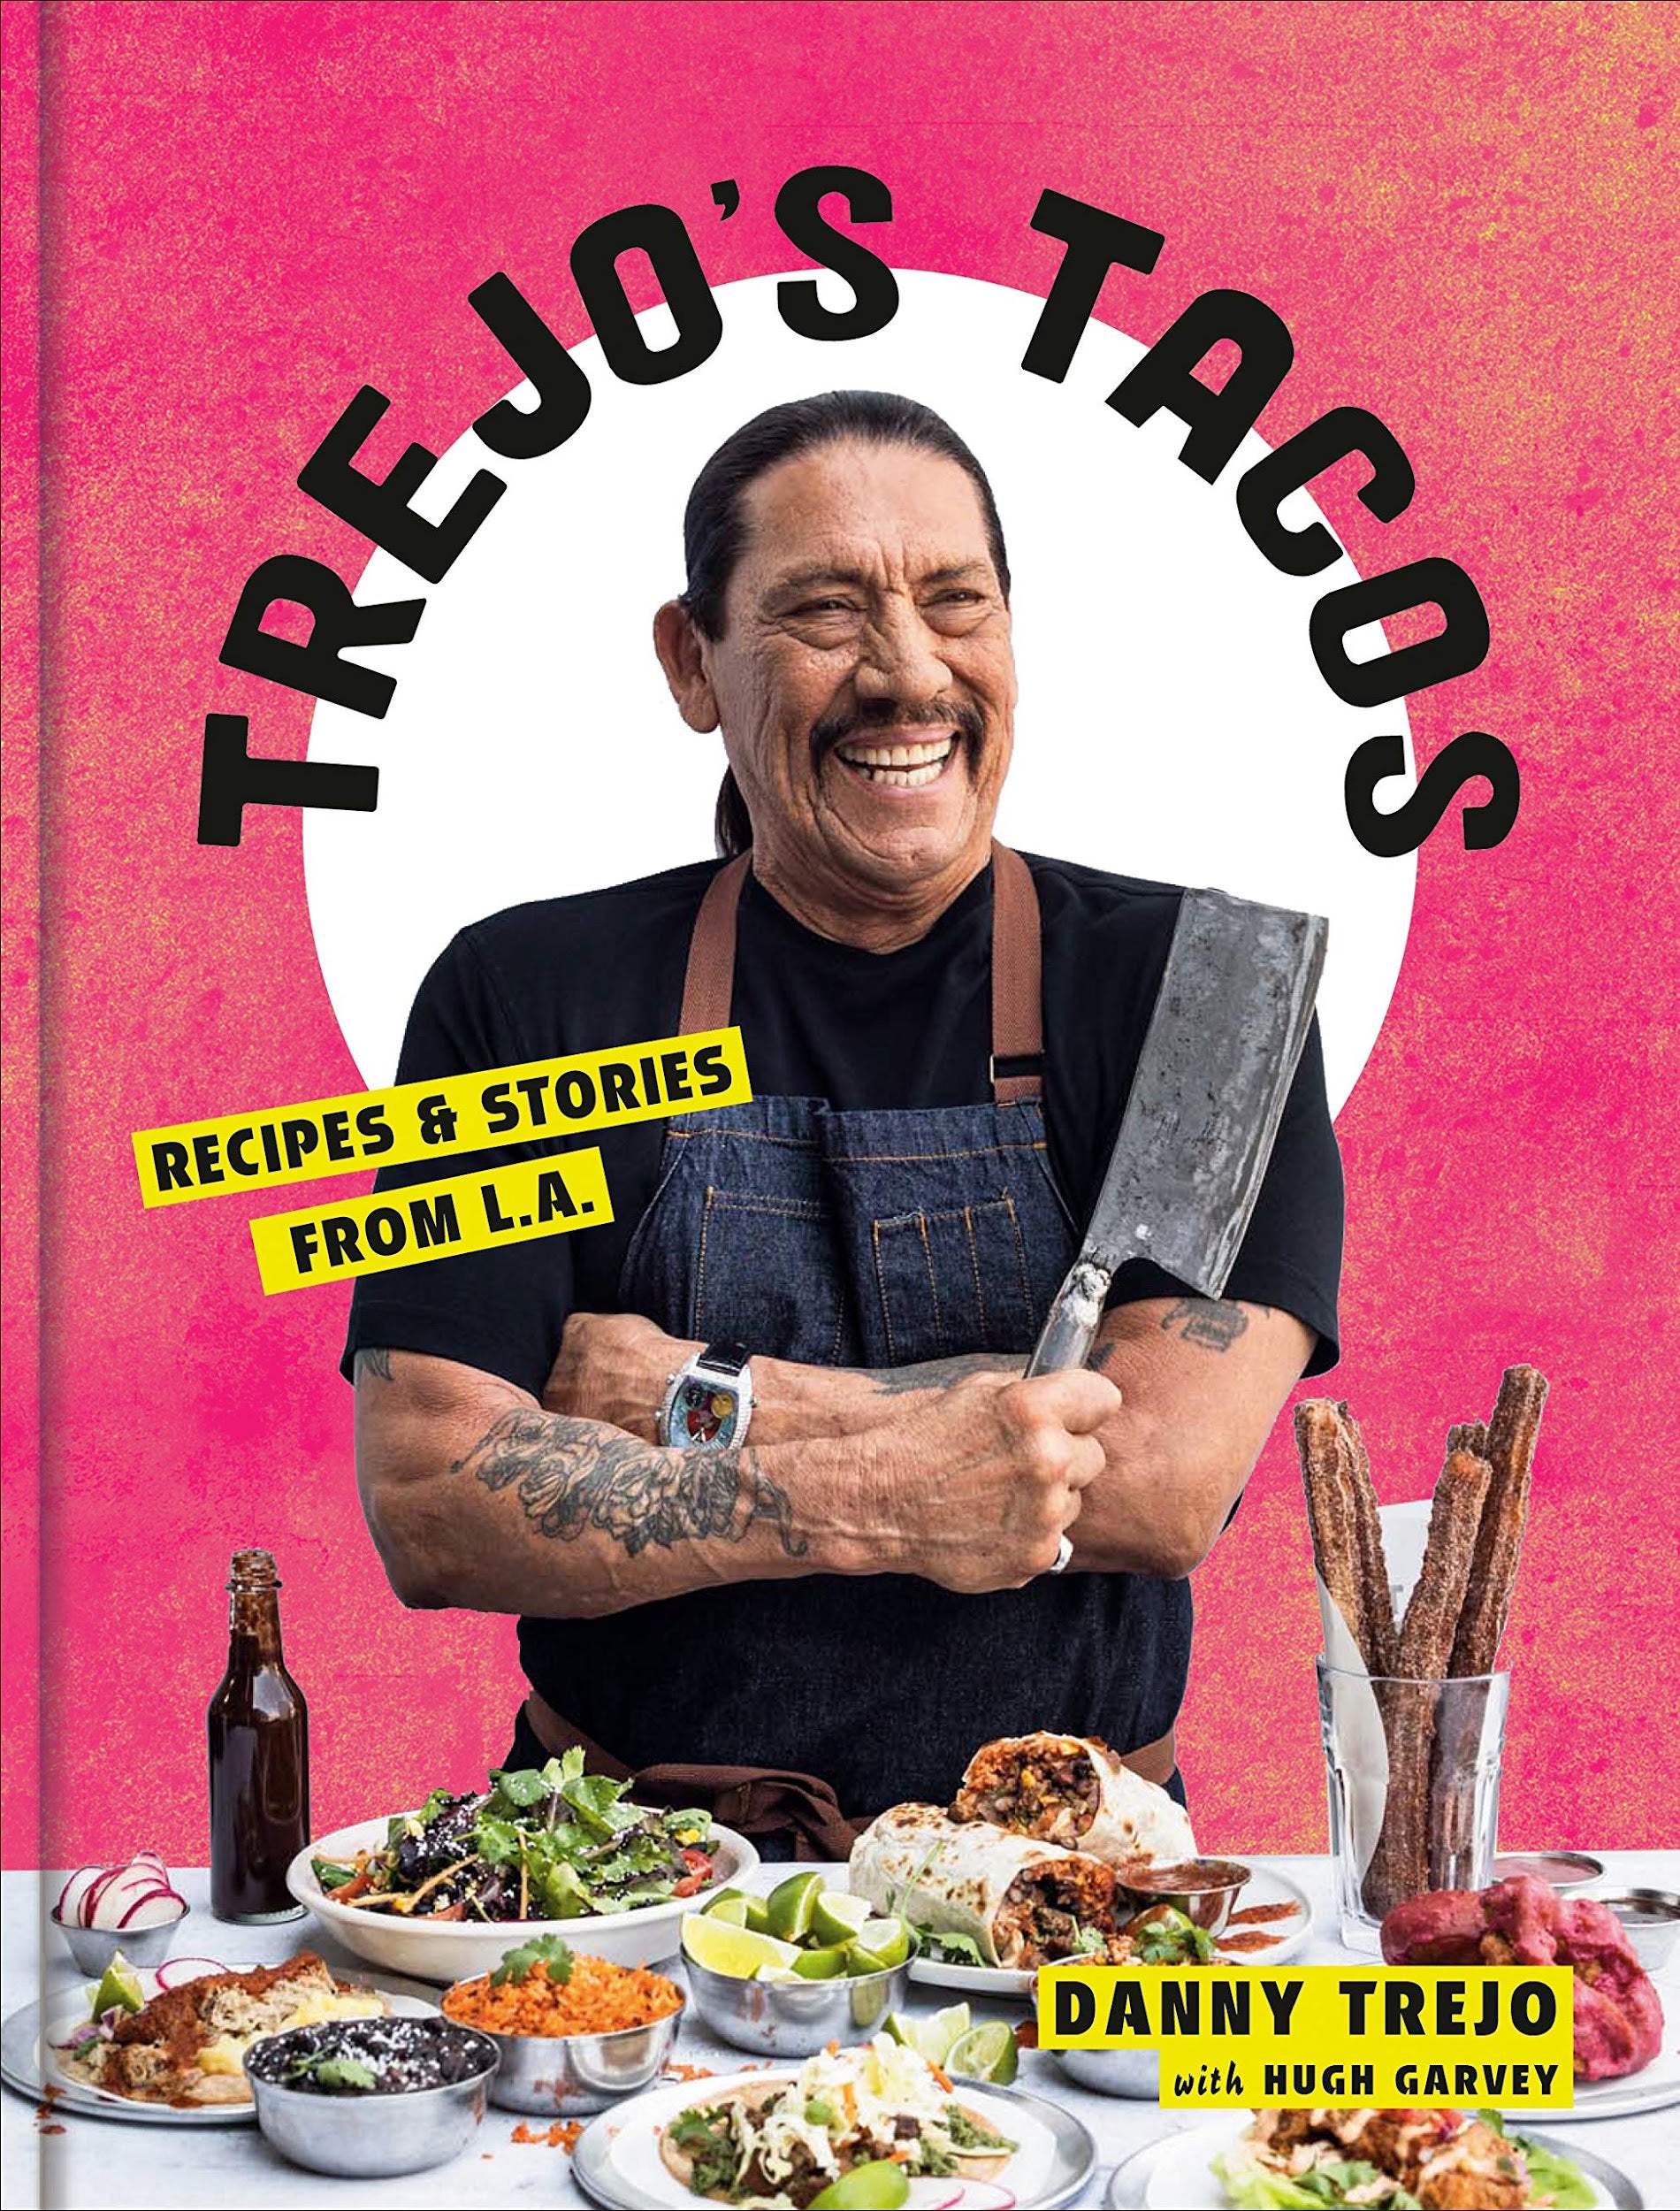 Recipes in Trejo’s new book include everything from lowrider donuts to award-winning vegan cauliflower tacos